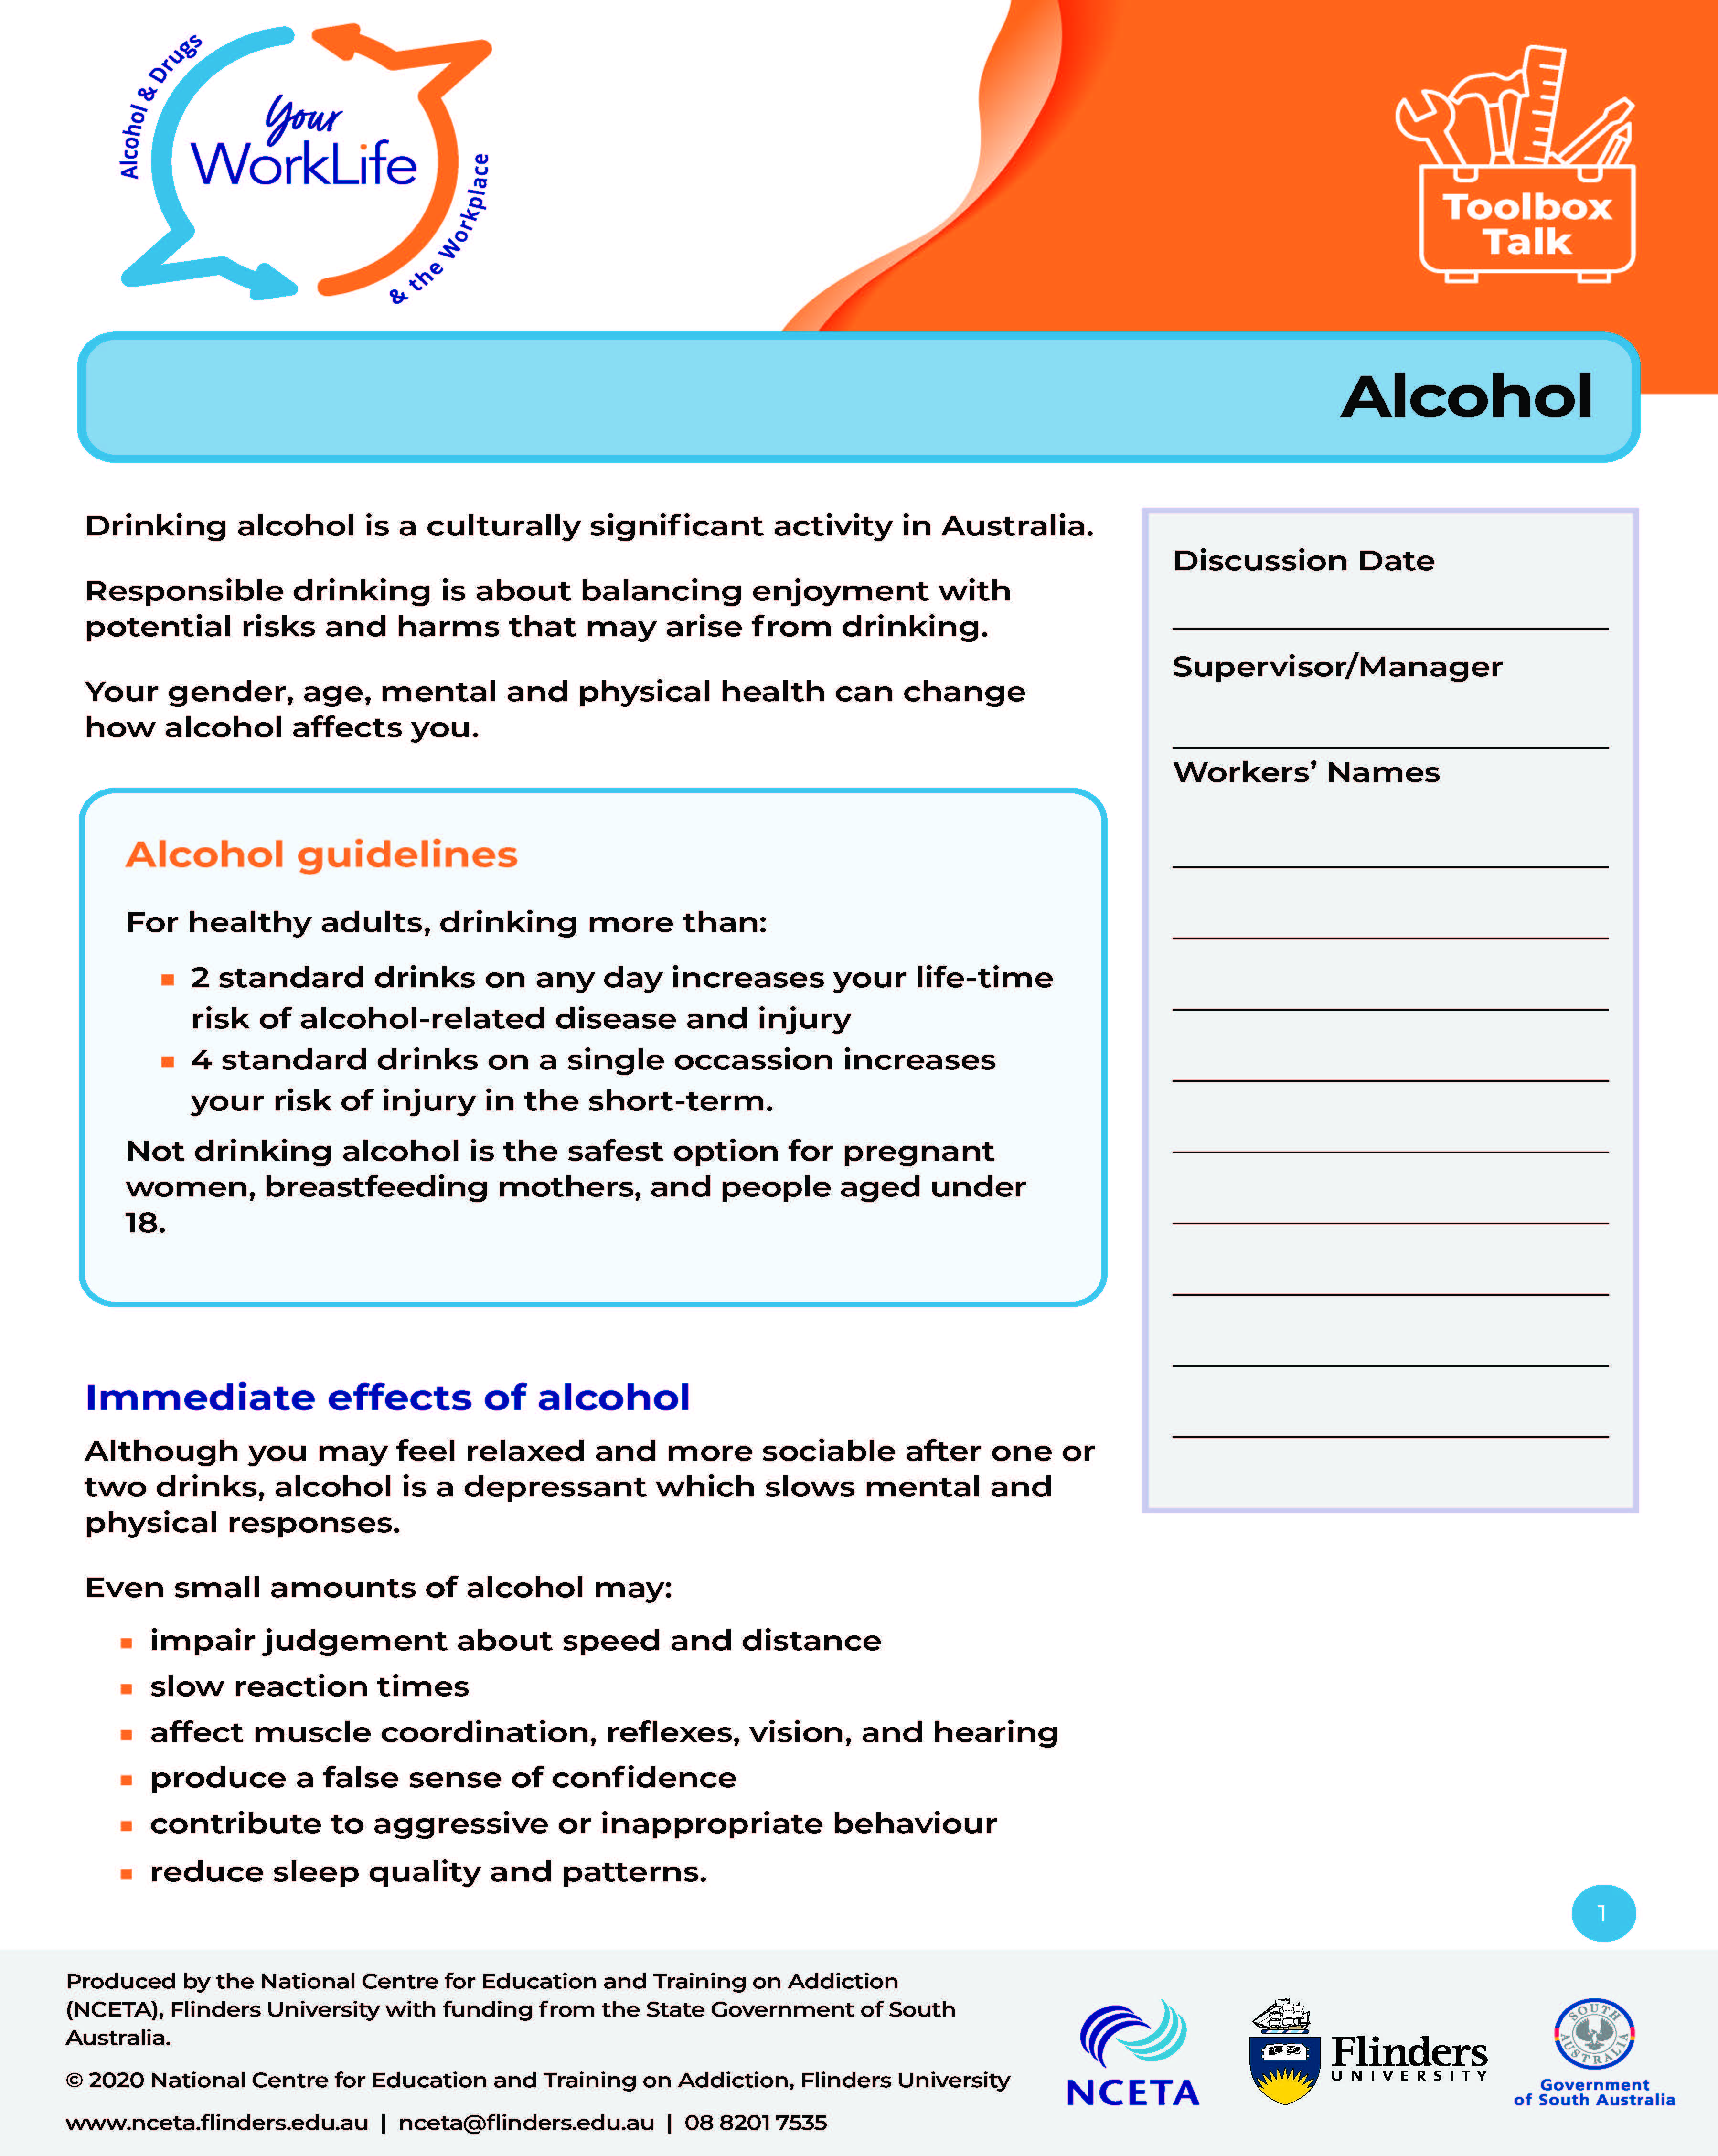 Front Page Toolbox-topic-alcohol 20200505.jpg